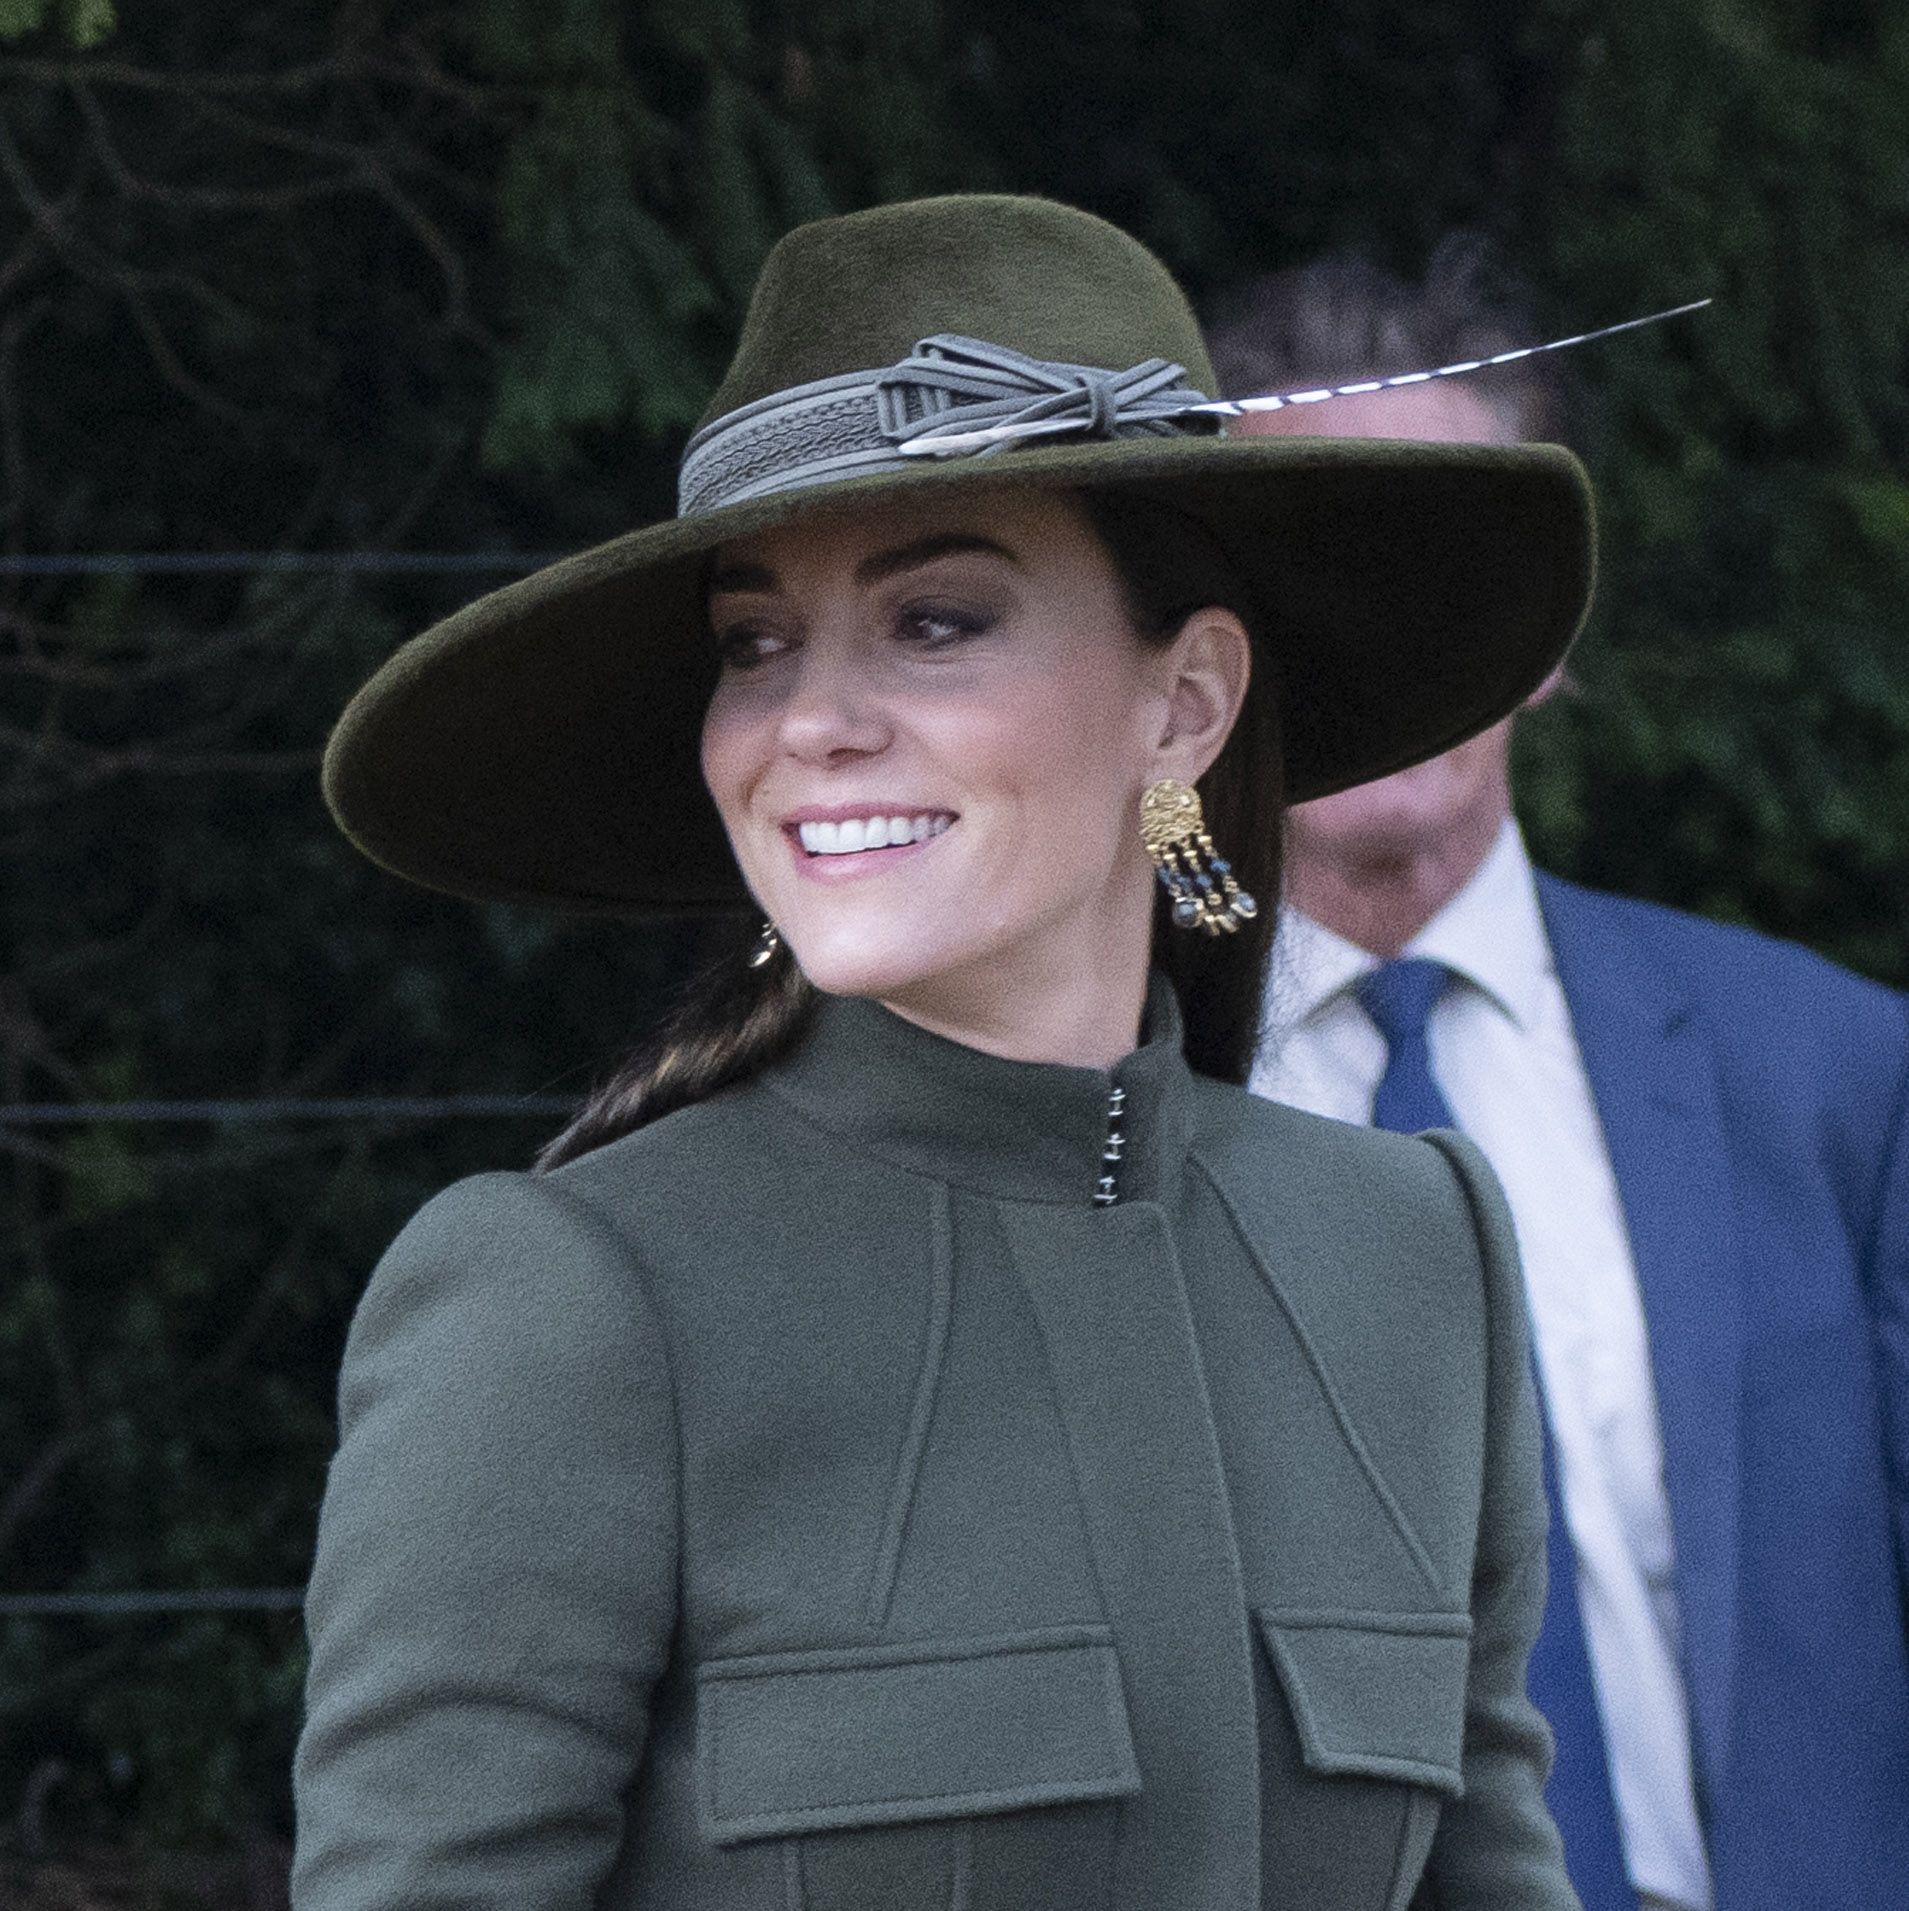 Kate Middleton Just Wore $130 Earrings That Were a Christmas Gift from Prince William